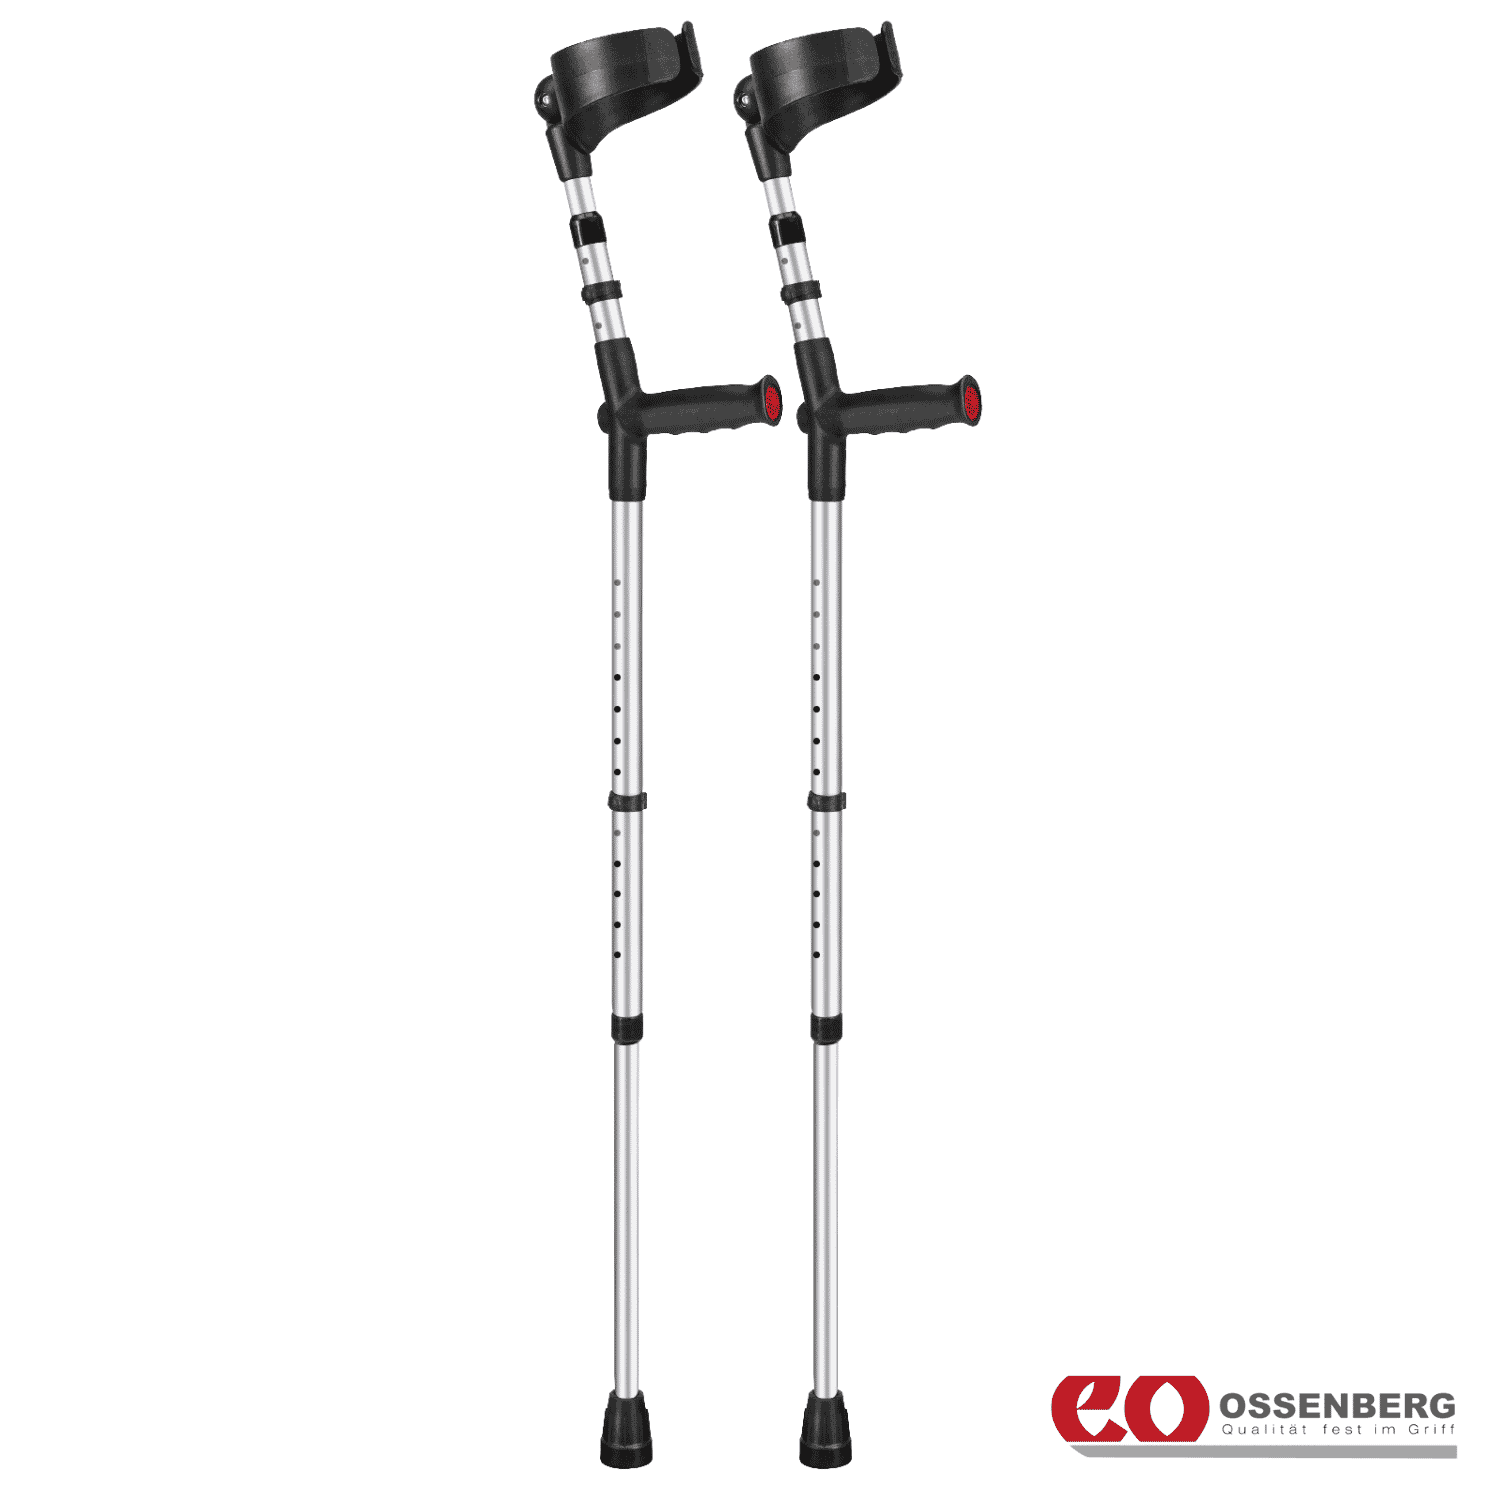 View Ossenberg Soft Grip Double Adjustable Crutches Silver Pair information